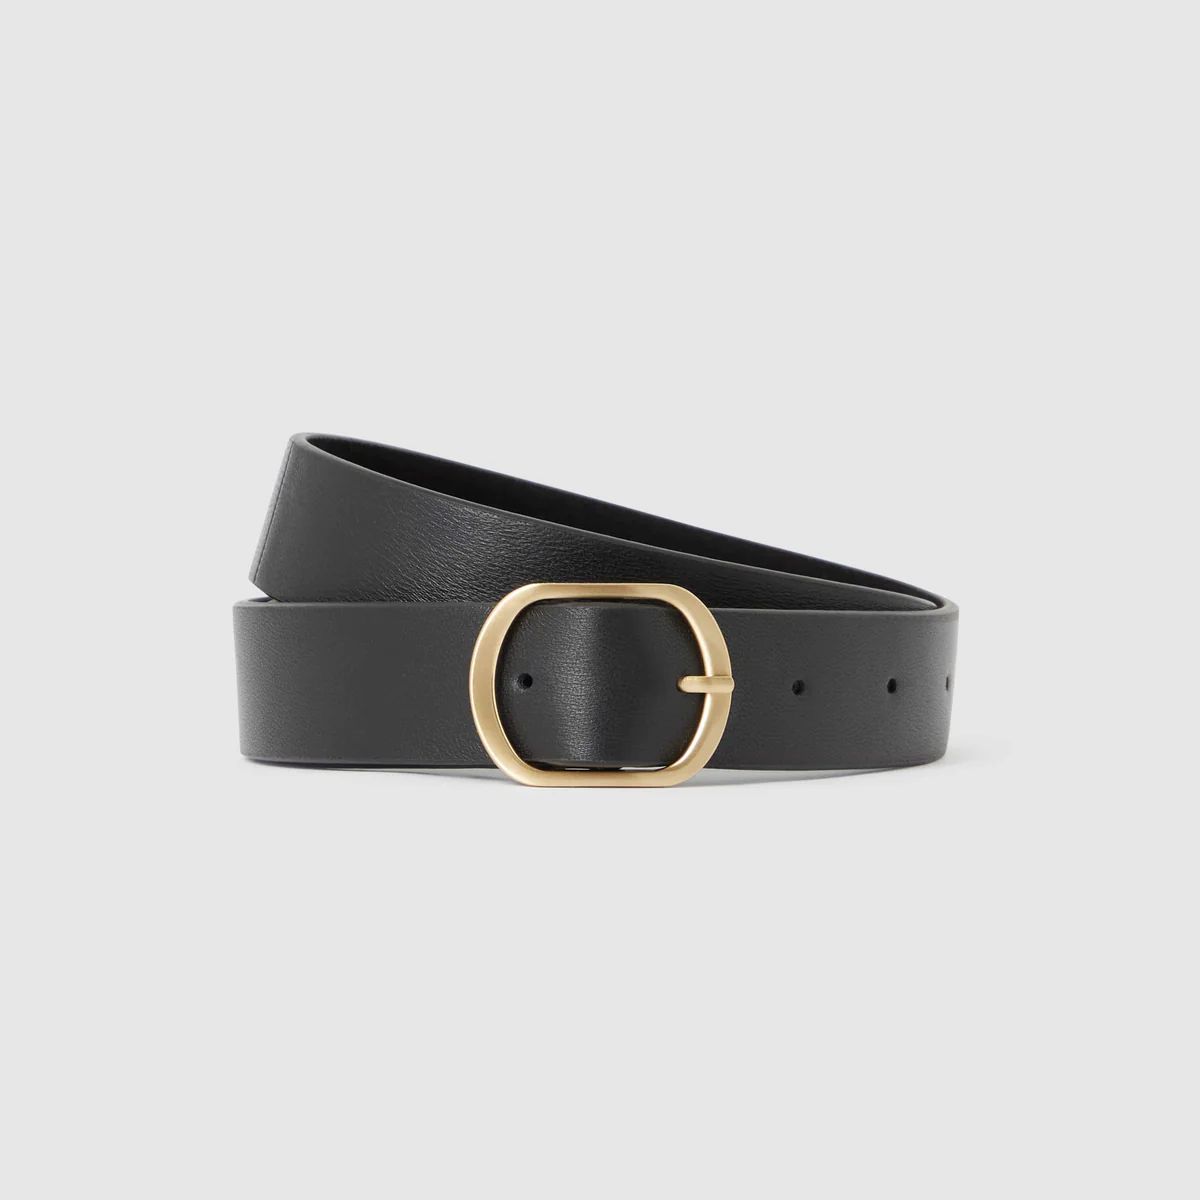 THE ULTIMATE LEATHER BELT - BLACK | WAT The Brand